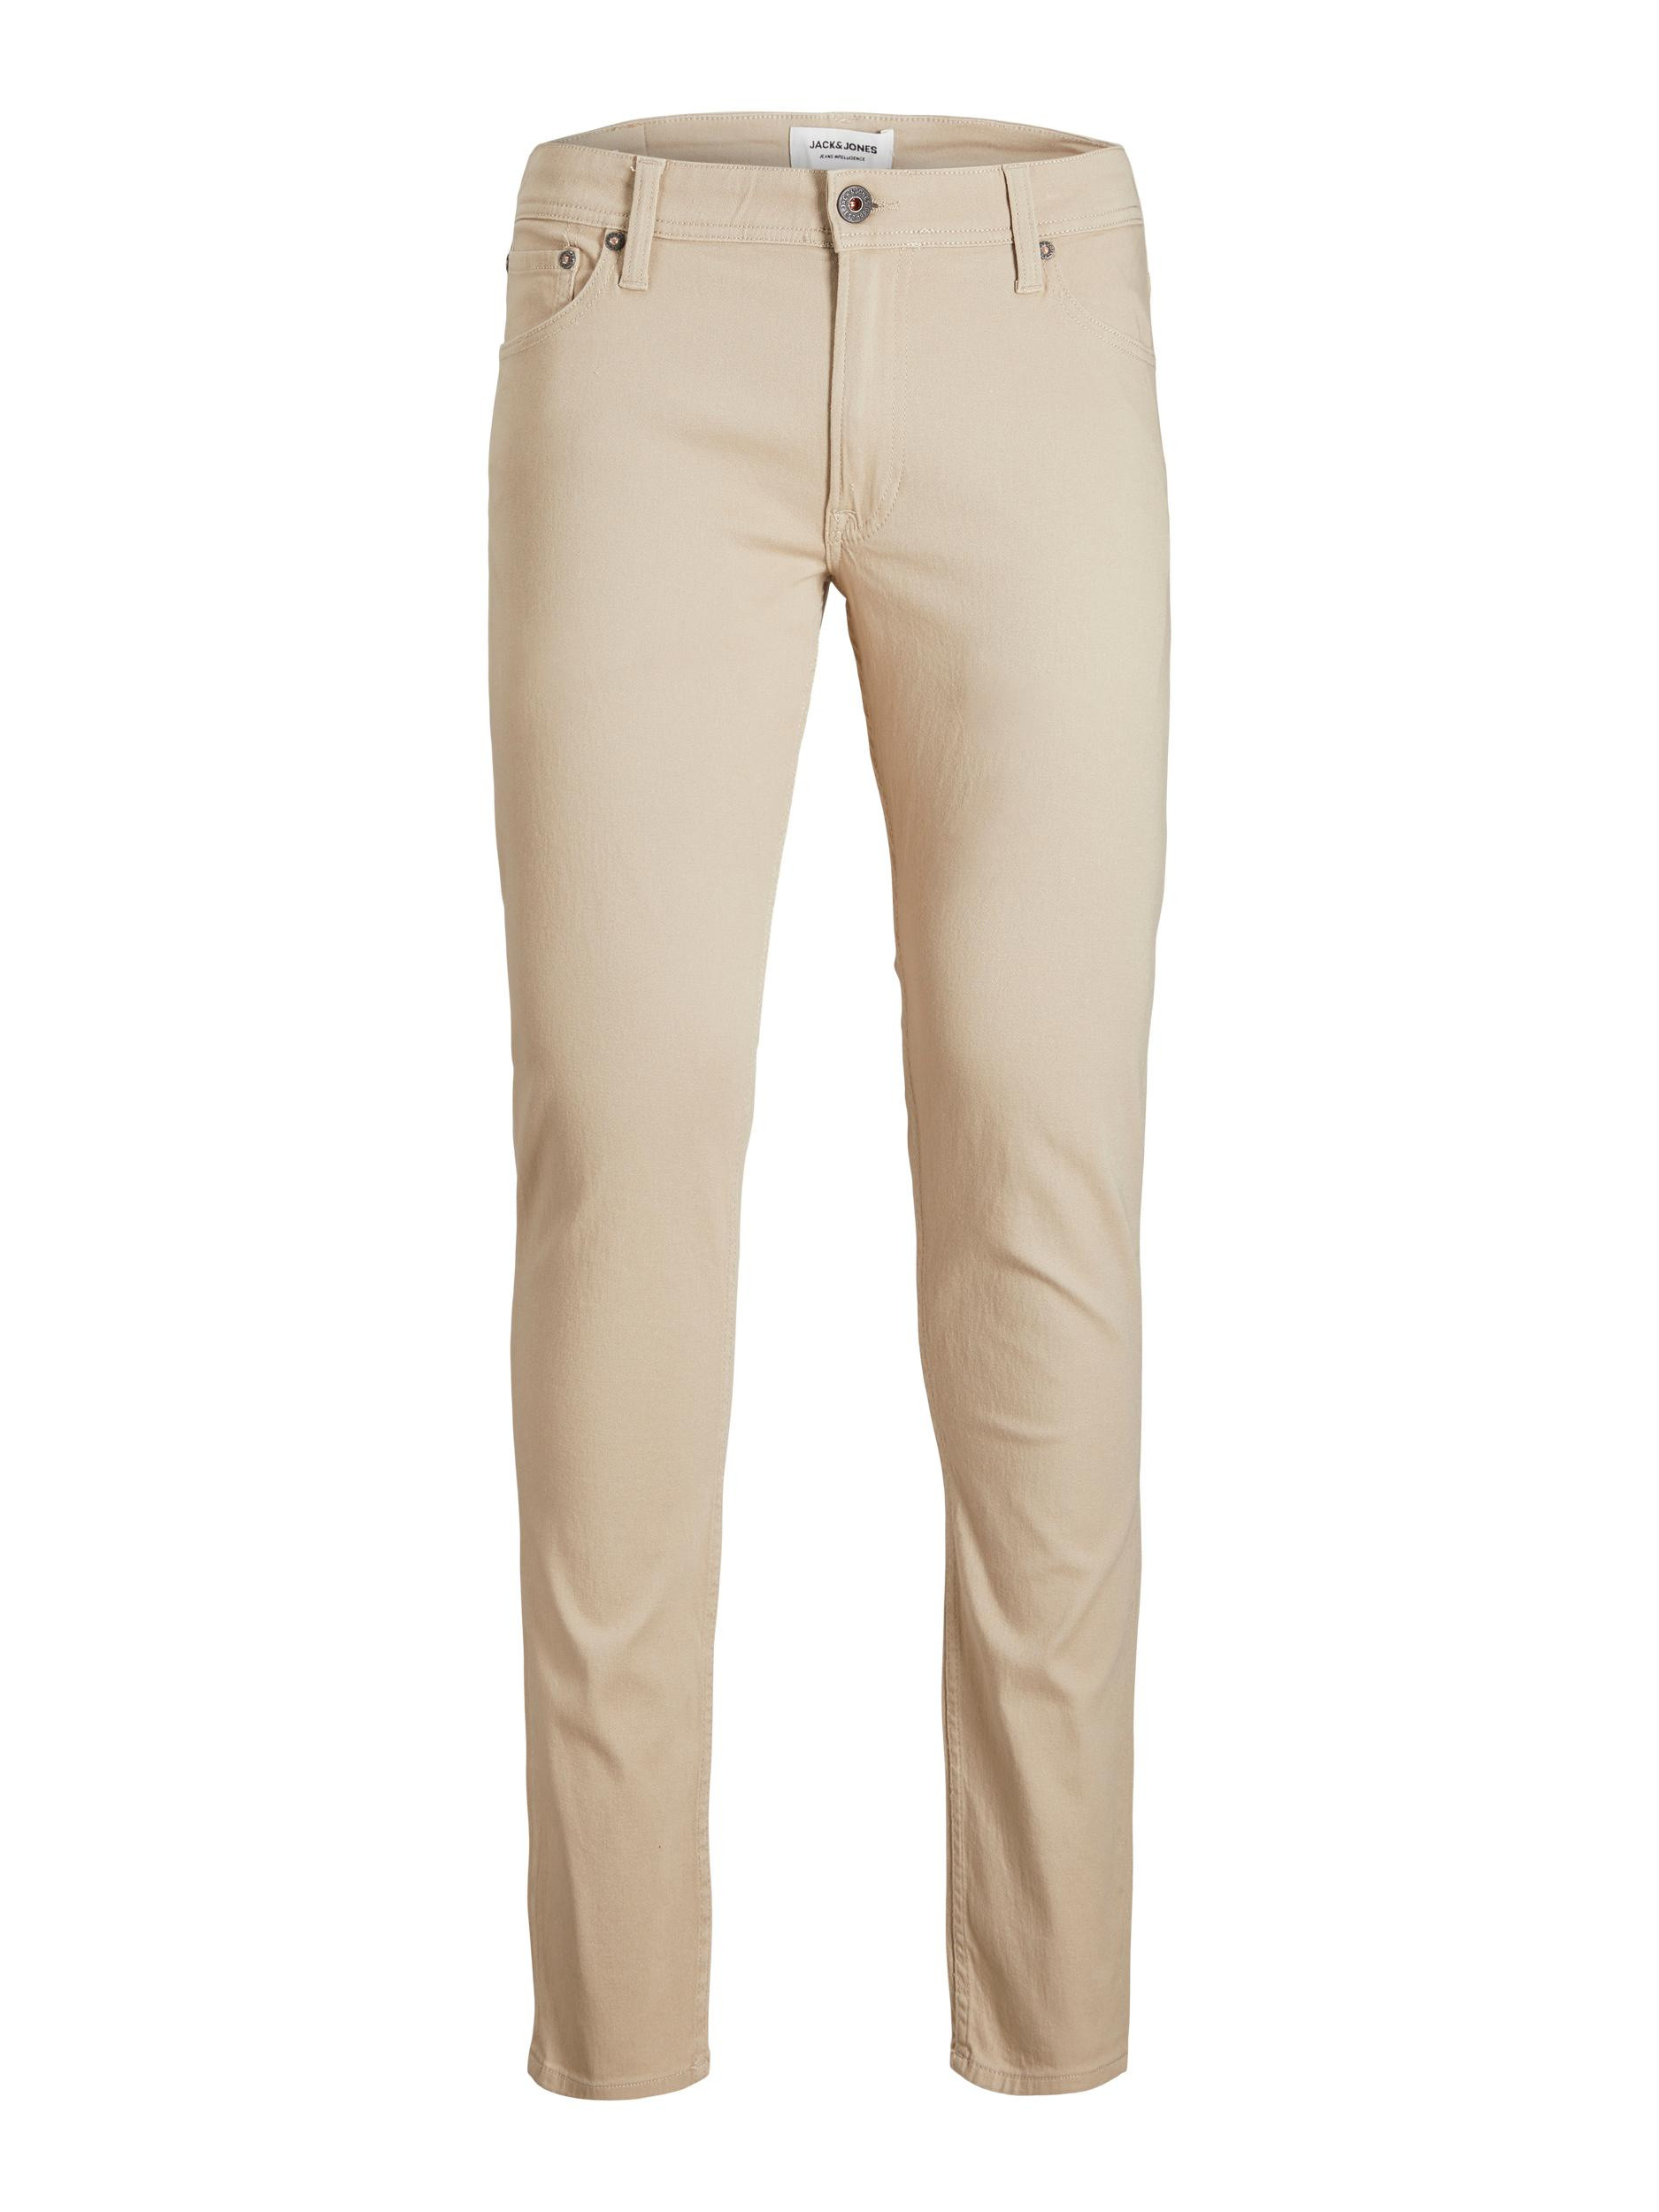 Trousers, Beige, large image number 0